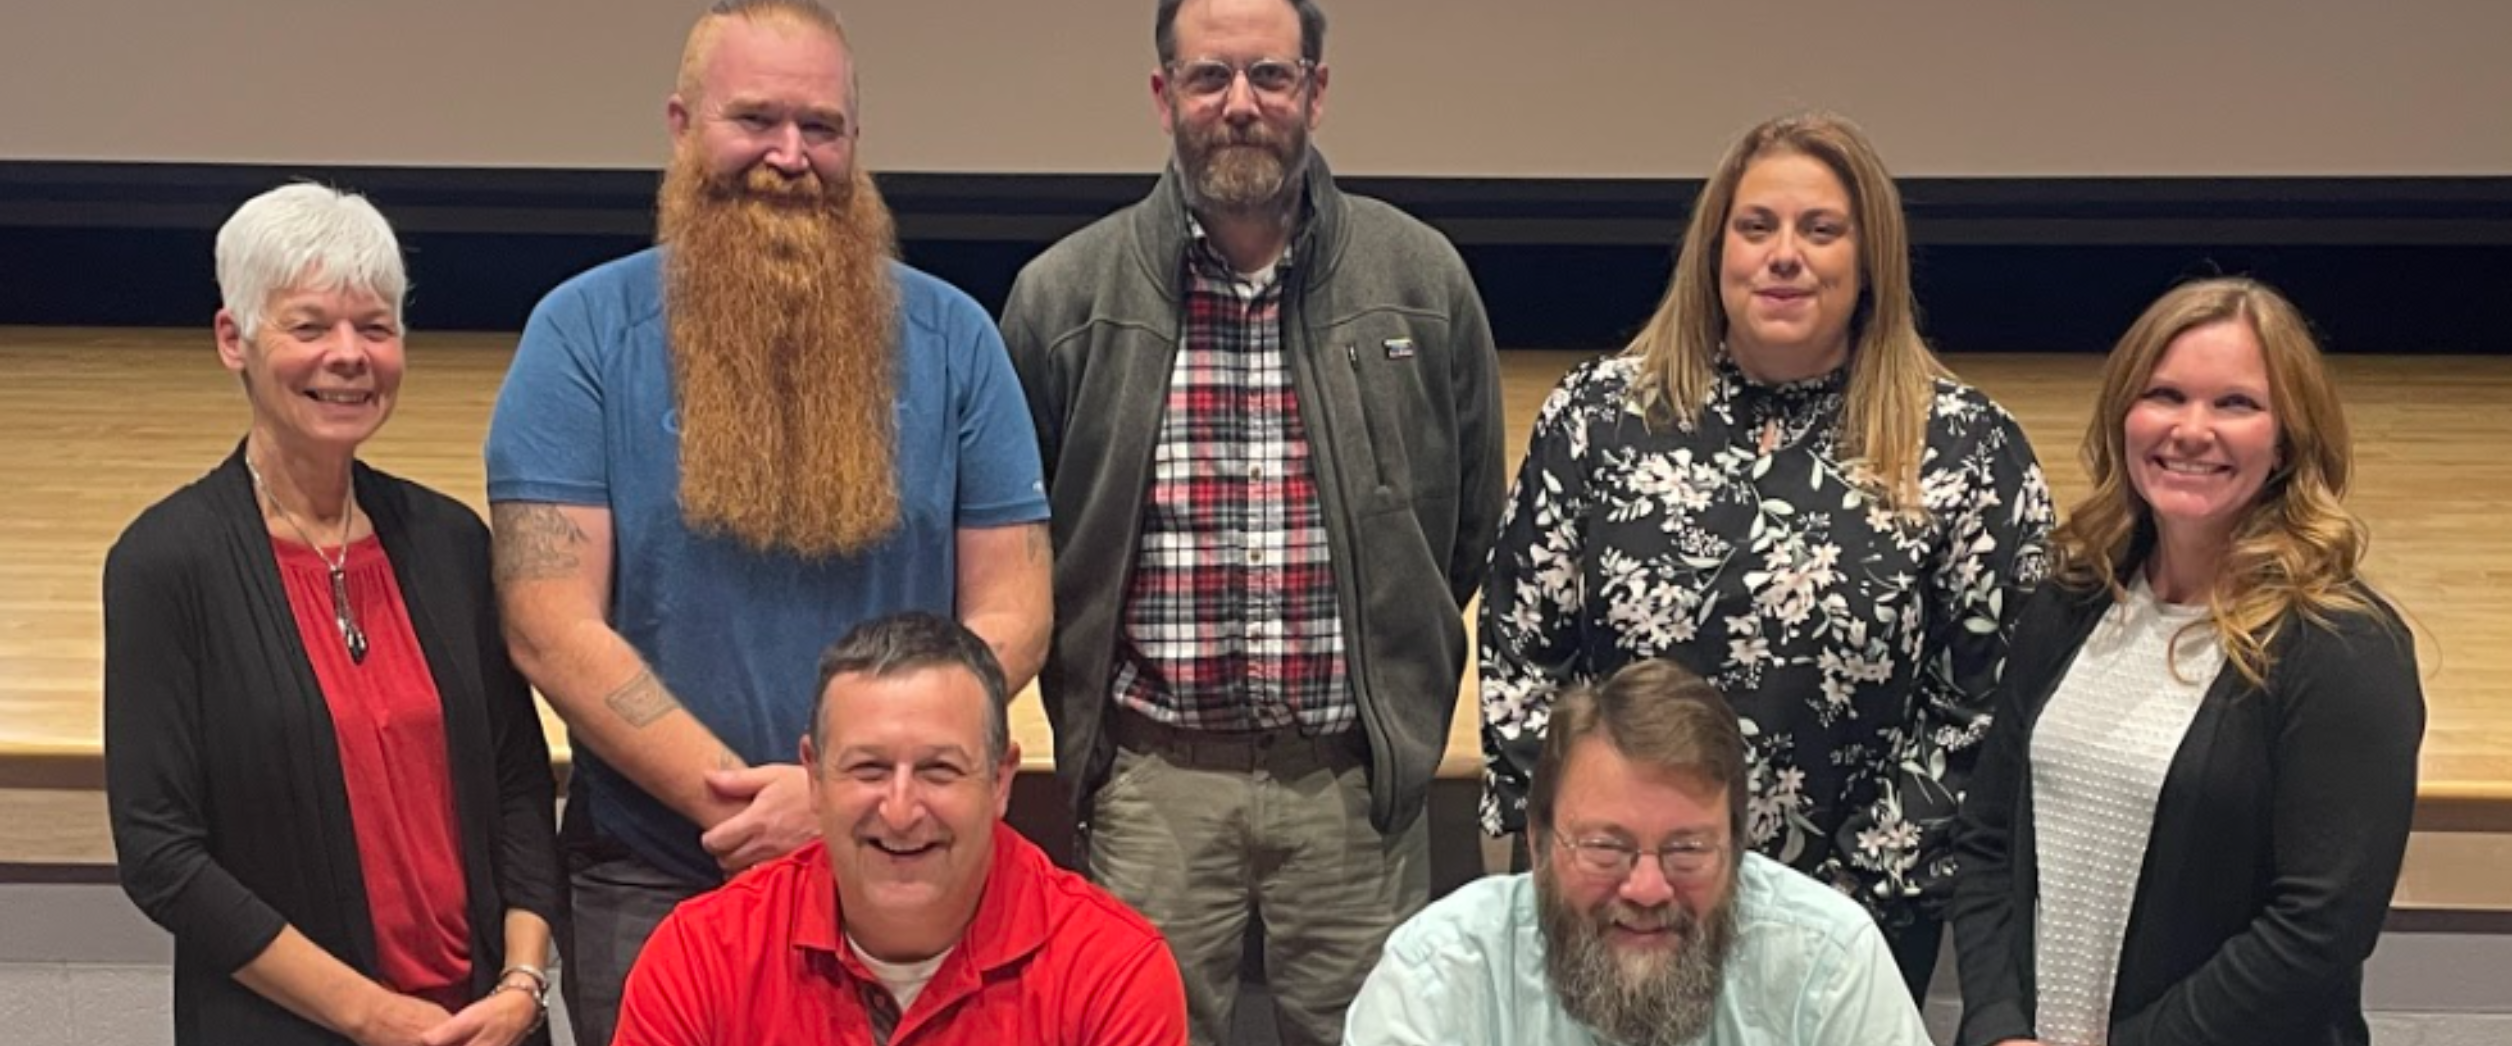 Welcome to the full OESJ Board of Education and it's newest member Shannon Smith – 2022-23. First row, from left, Neil Clark, Vice President; and Dean Handy, Vice President. Second row, from left, Susan Sammons, Anton Christensen, Jeremy Brundage, Shannon Smith and Sarah Barnes